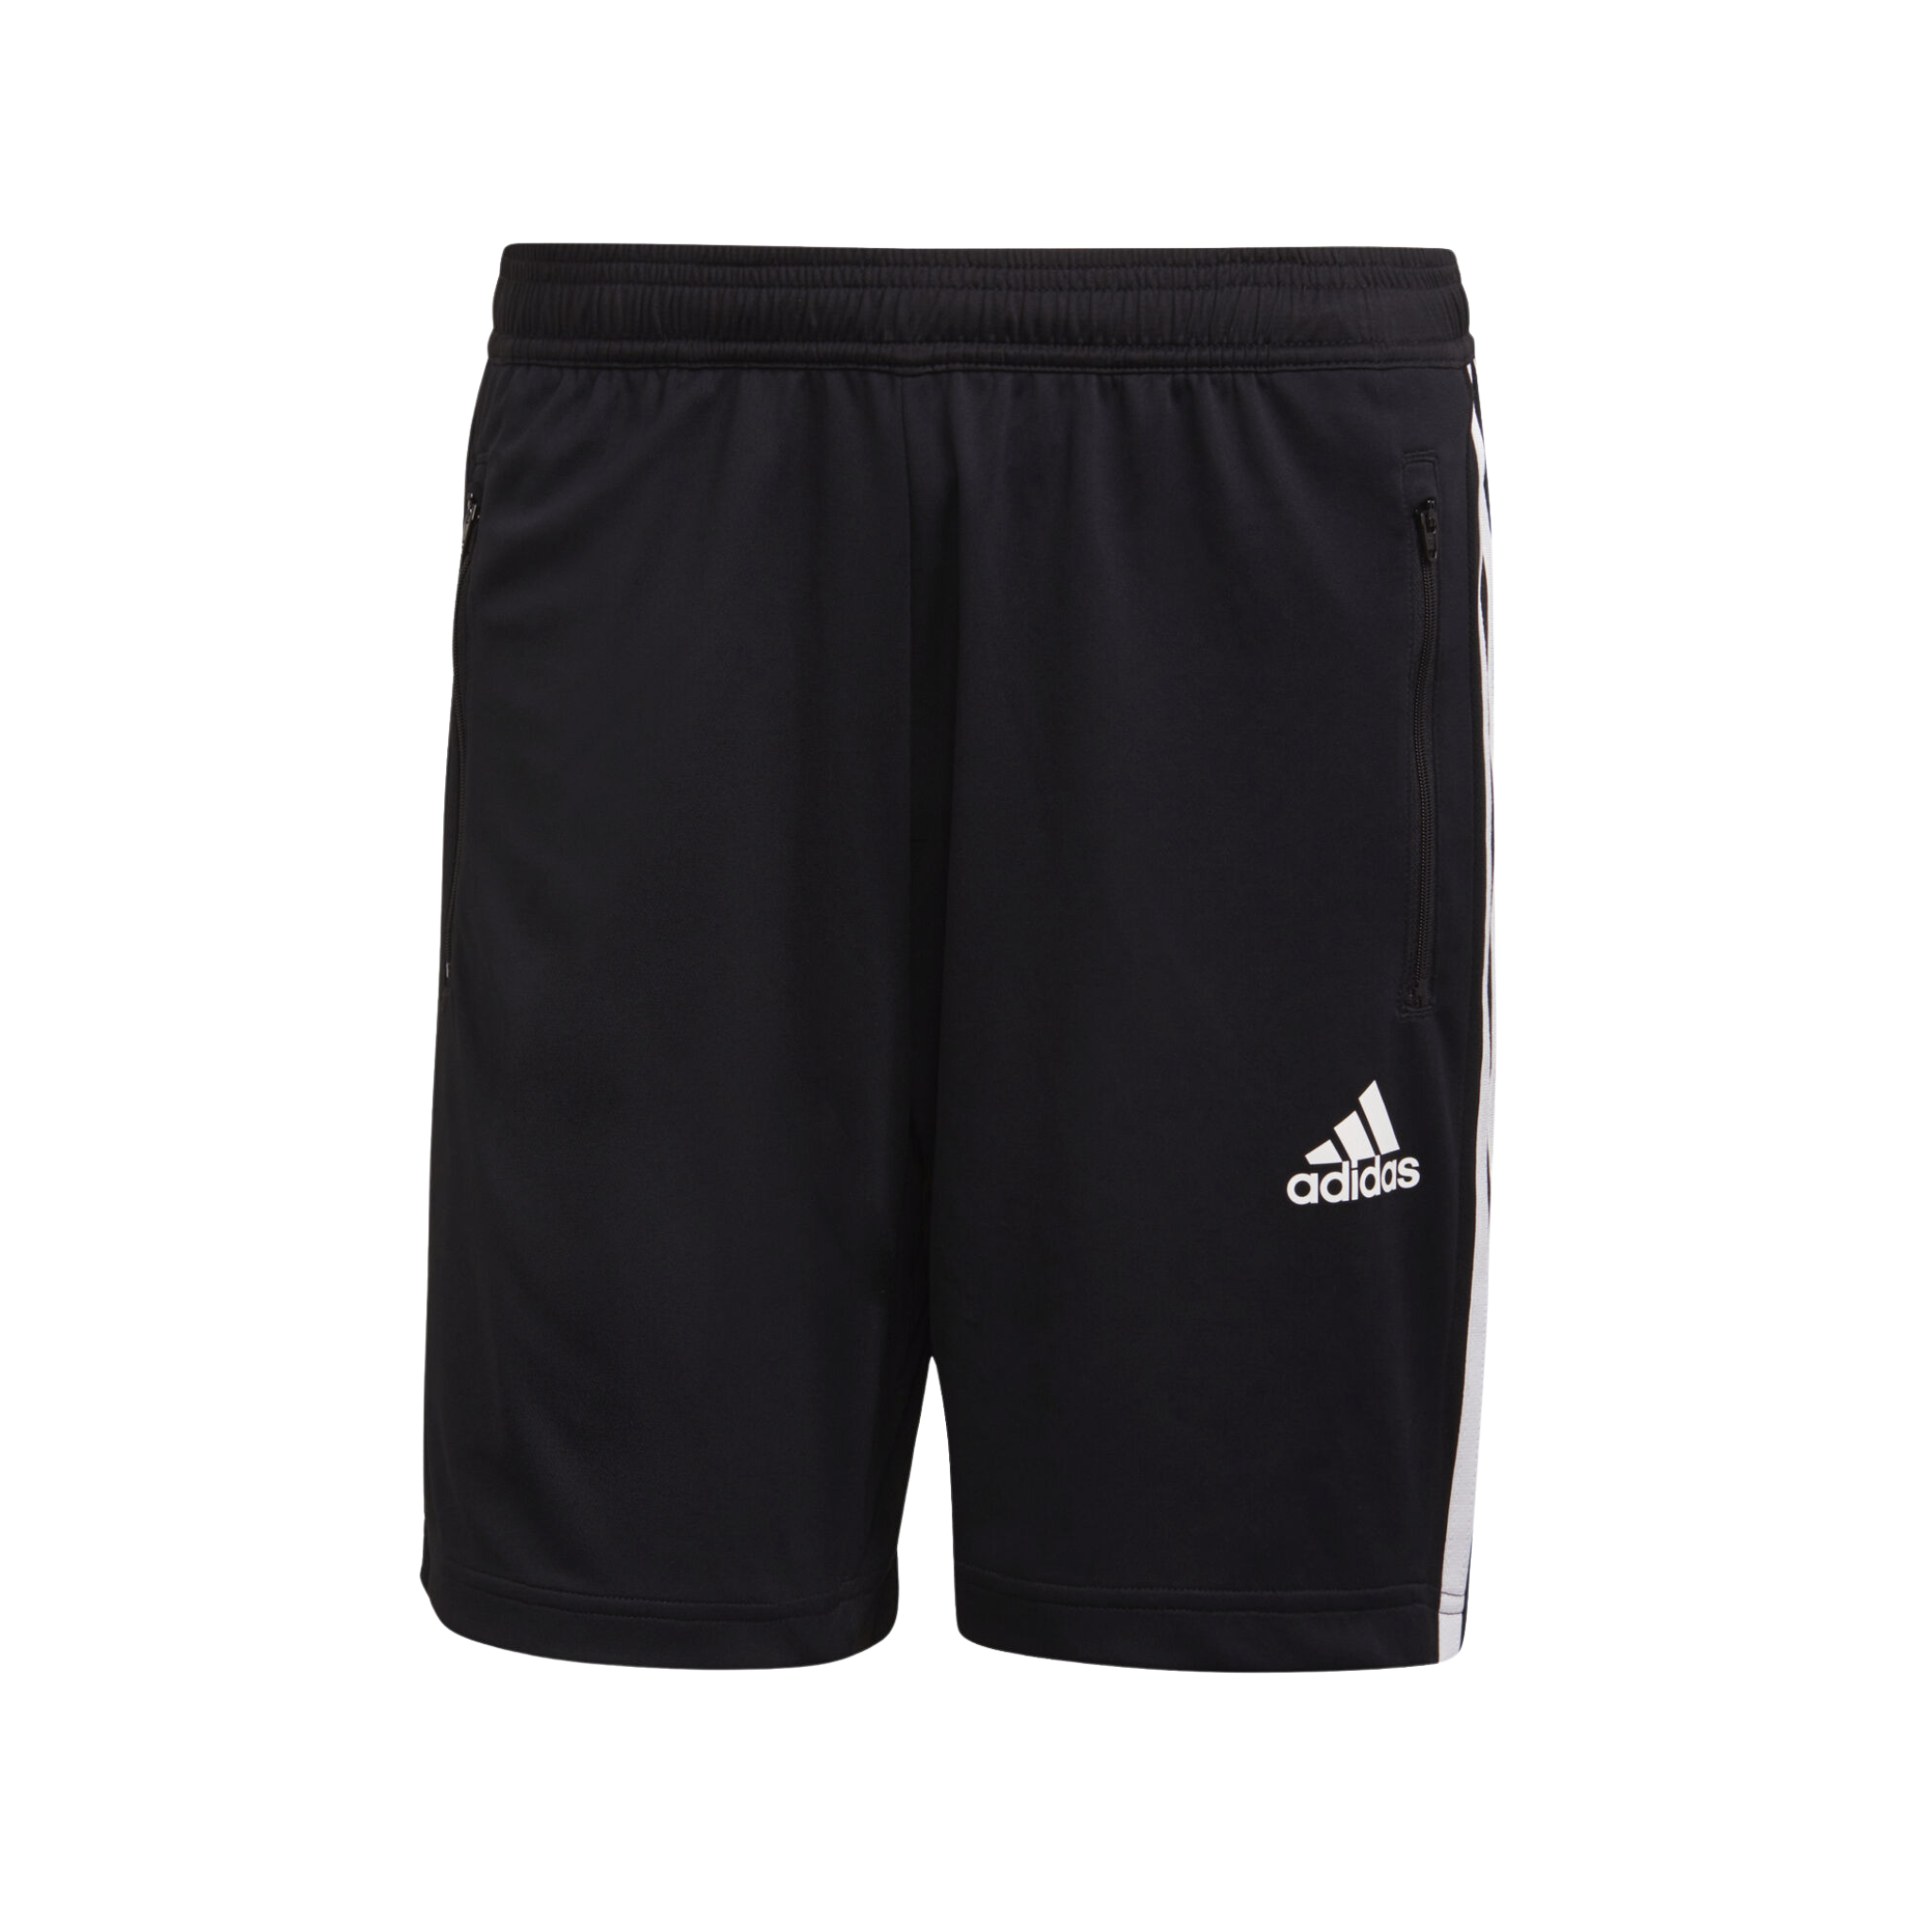 Up To 80% Off Adidas Clothing And Shoes